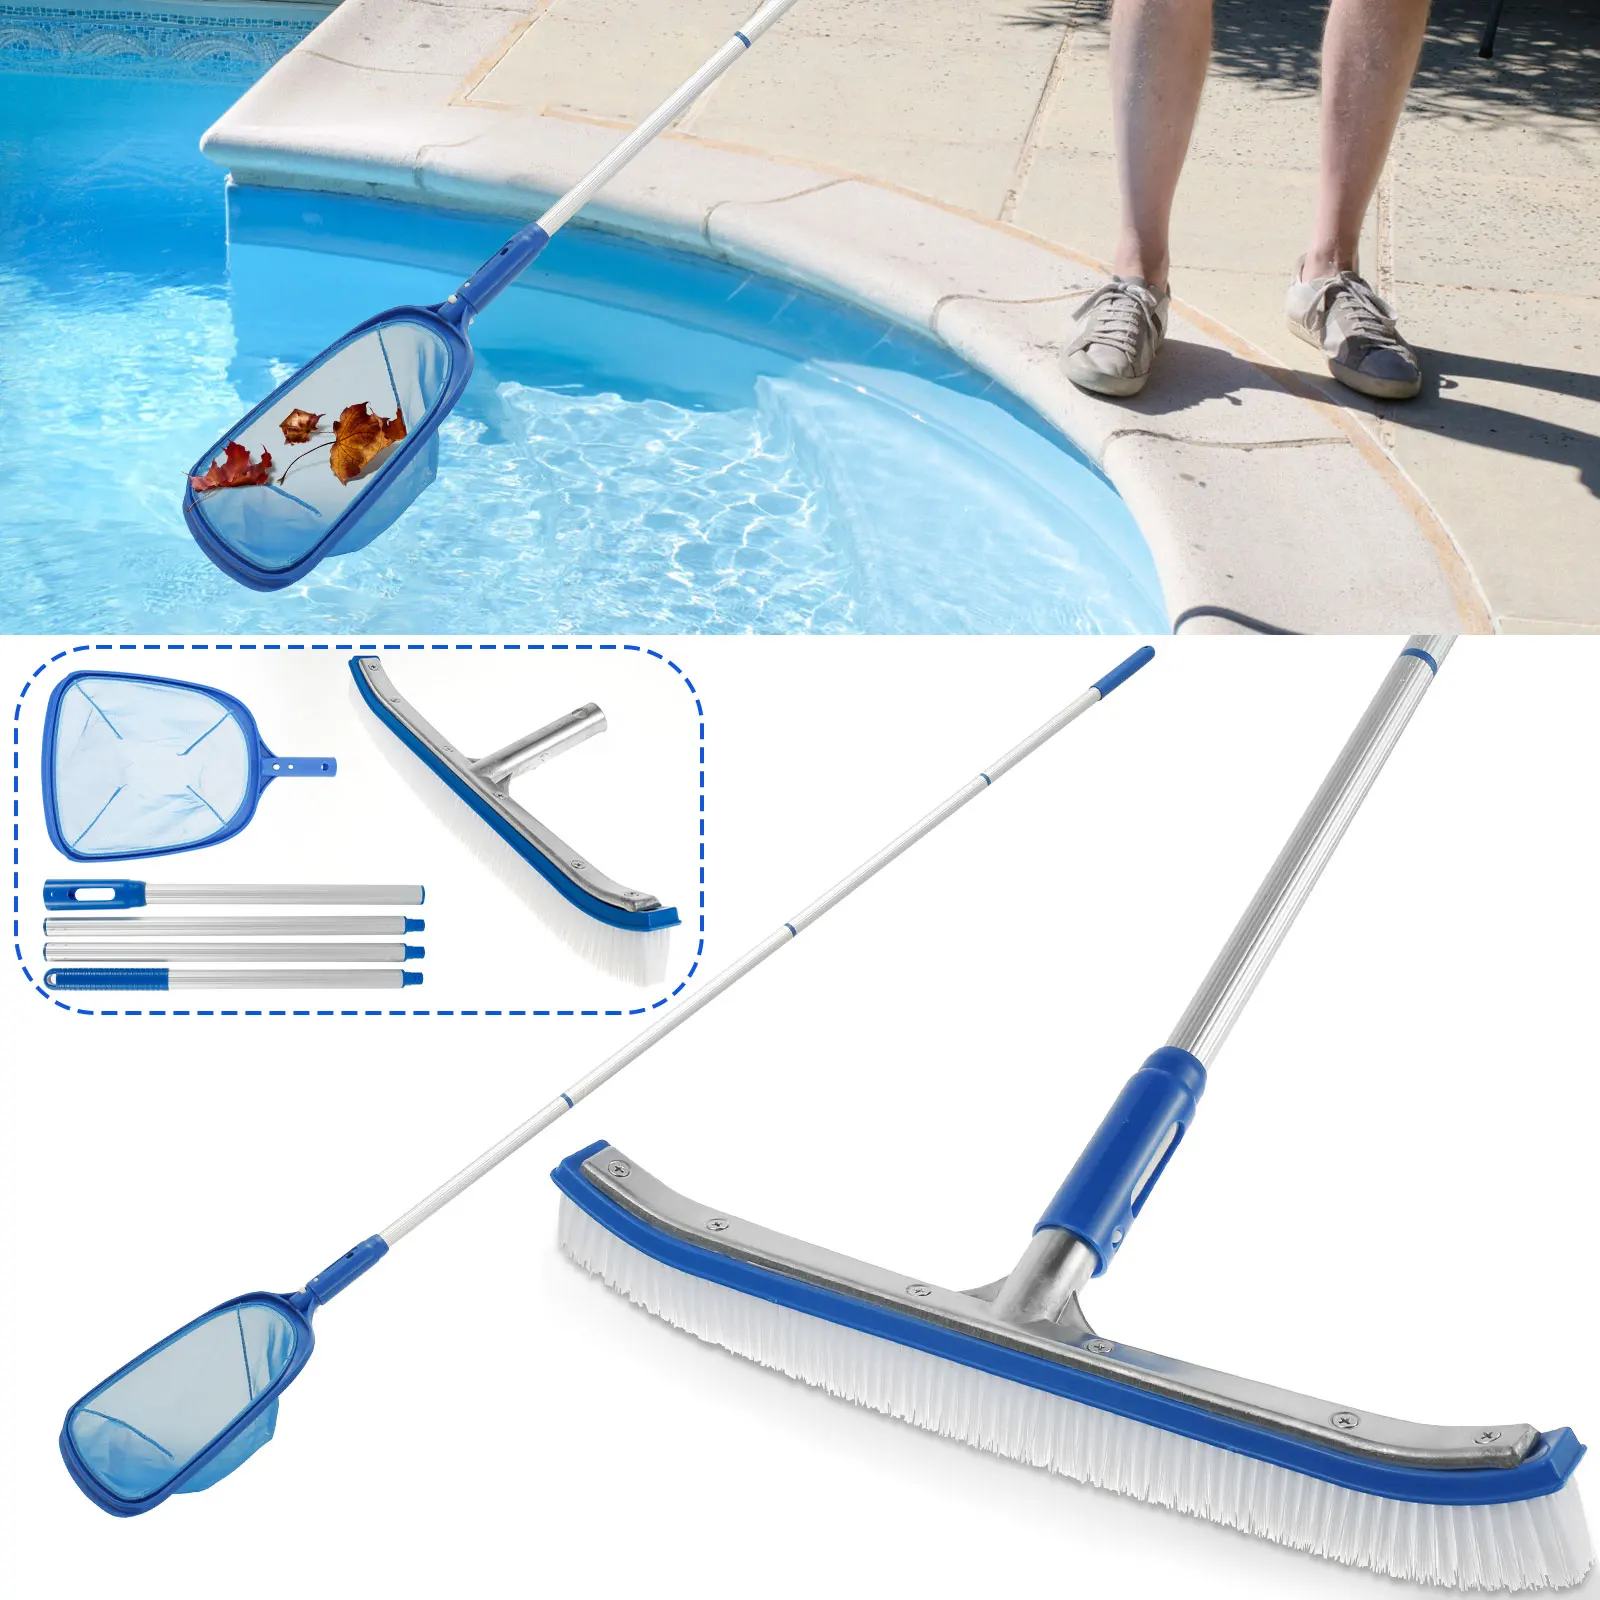 NEW Swimming Pool Brush Set Portable Swimming Pool Cleaning Brush with 63in Handle Lightweight Pool Brush Set Adjustable